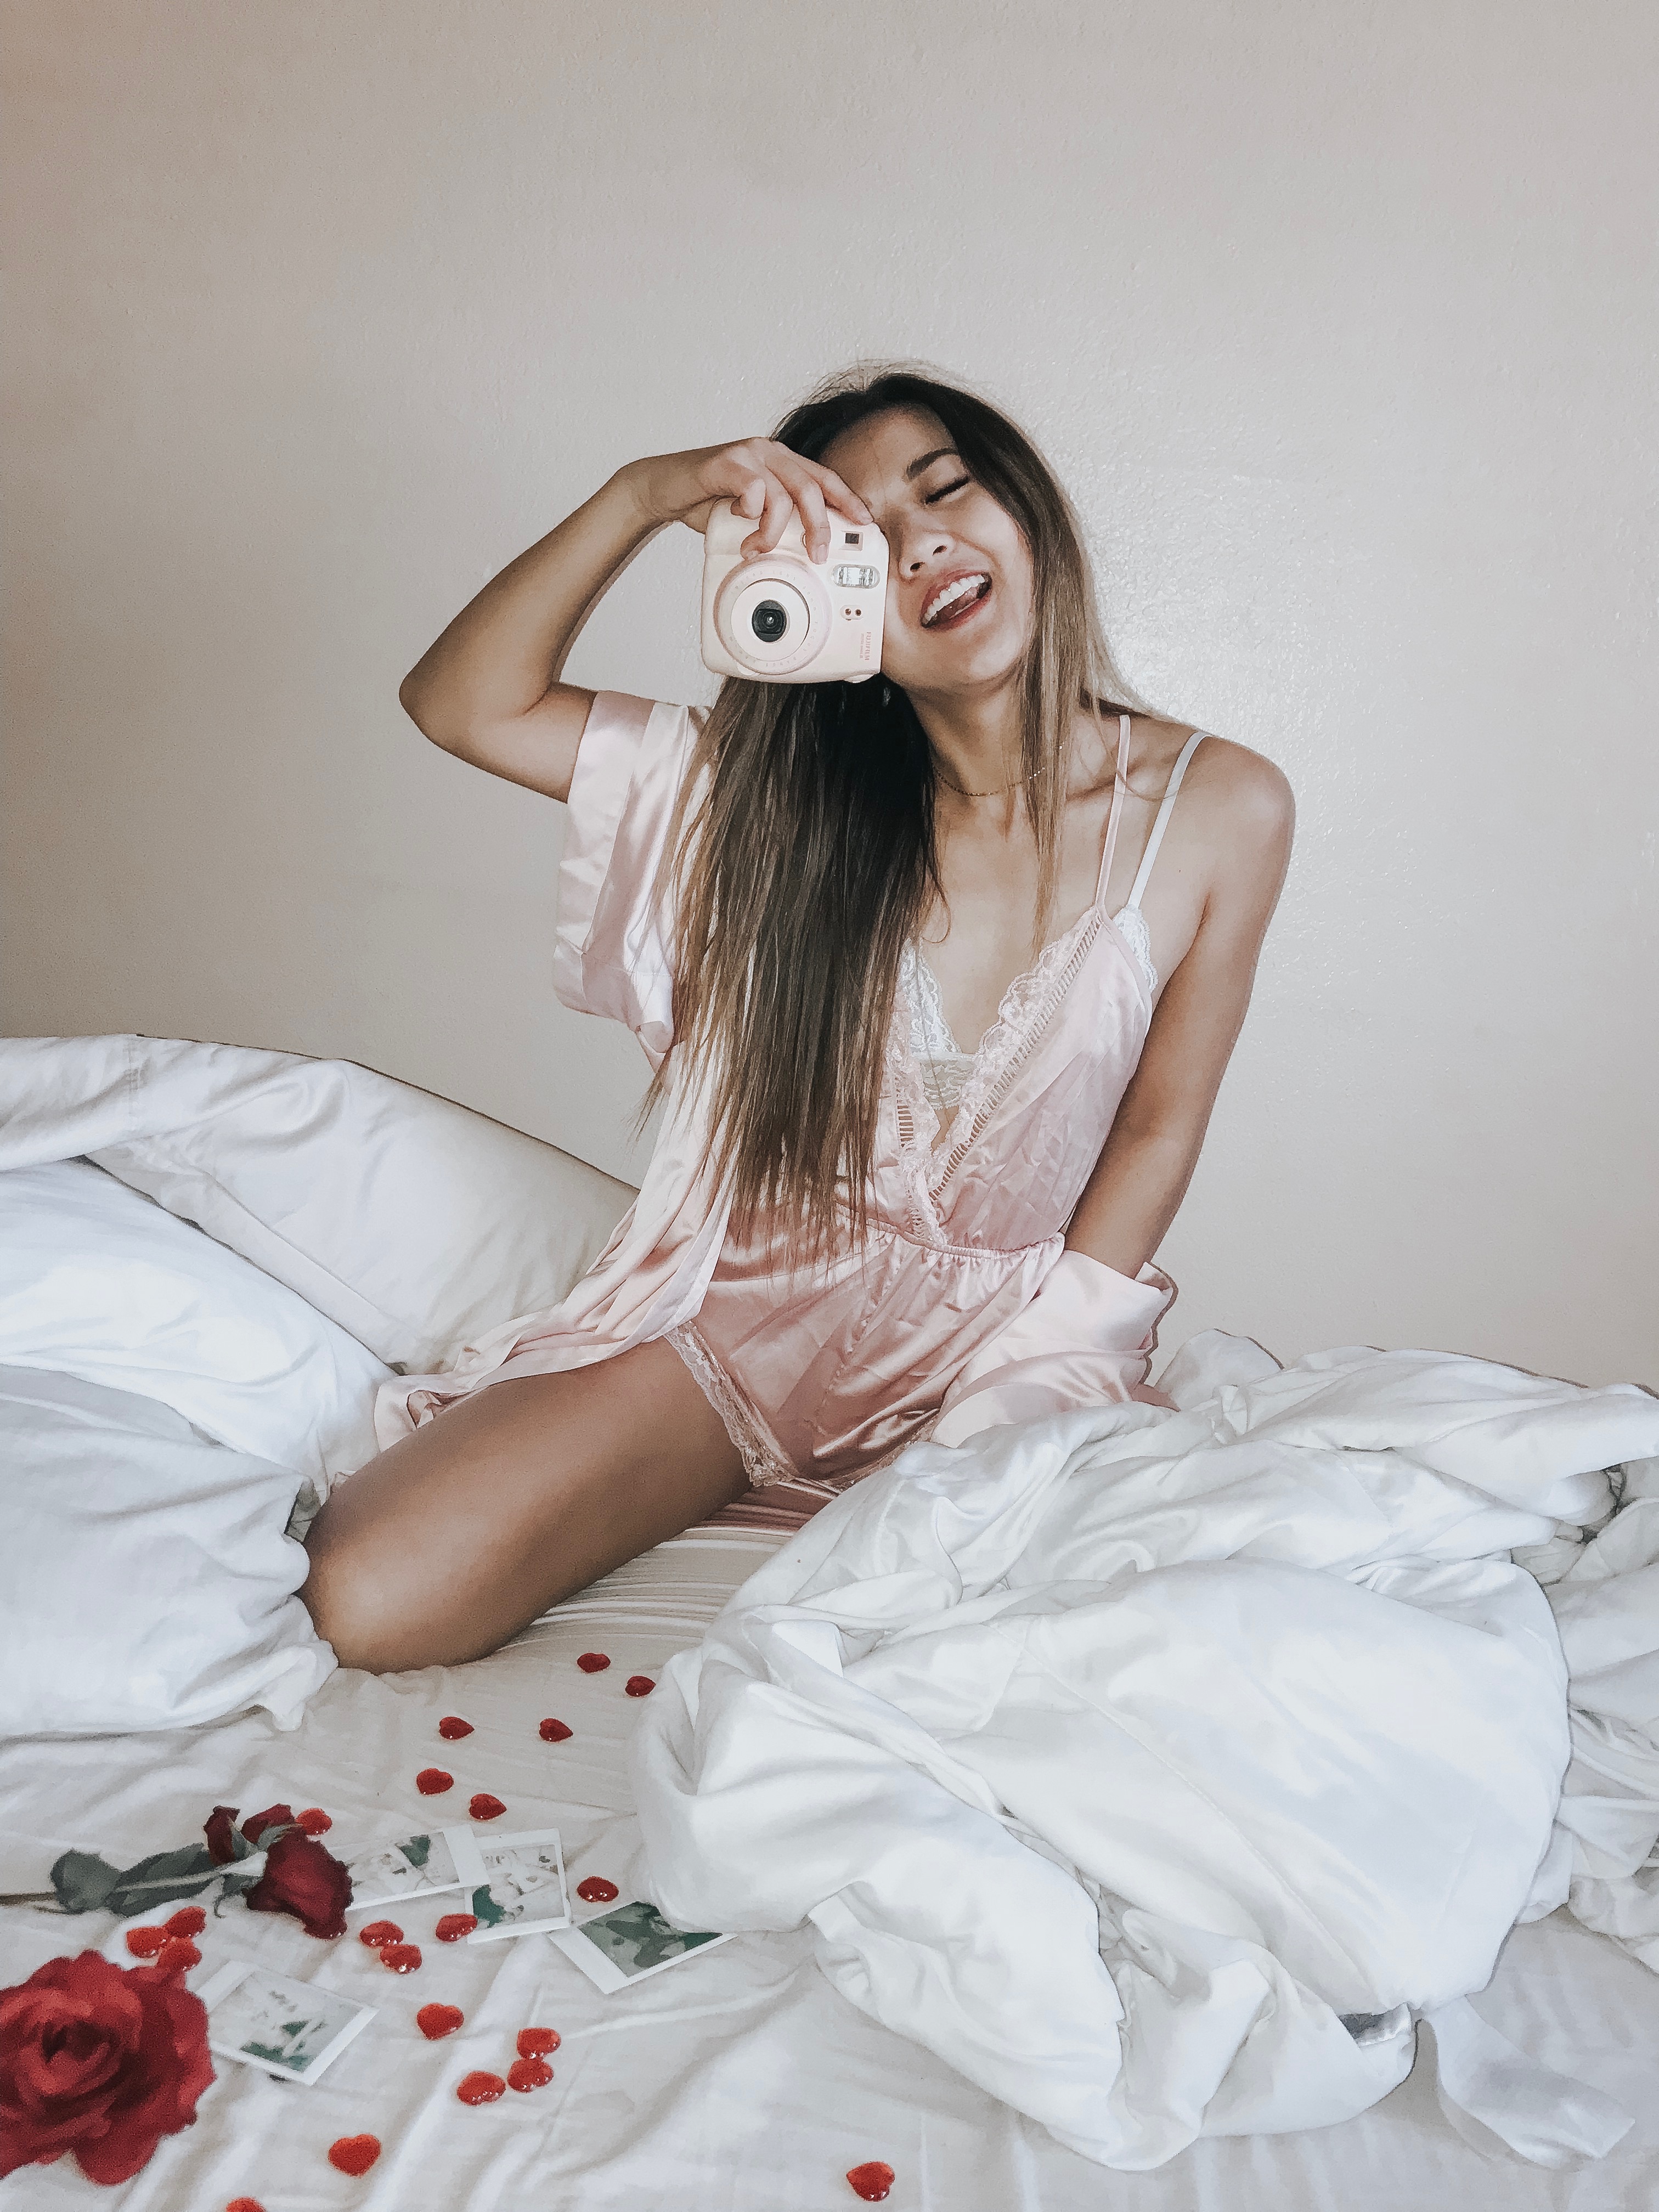 Arizona Lifestyle blogger Demi Bang talks about why she loves Valentine's Day.